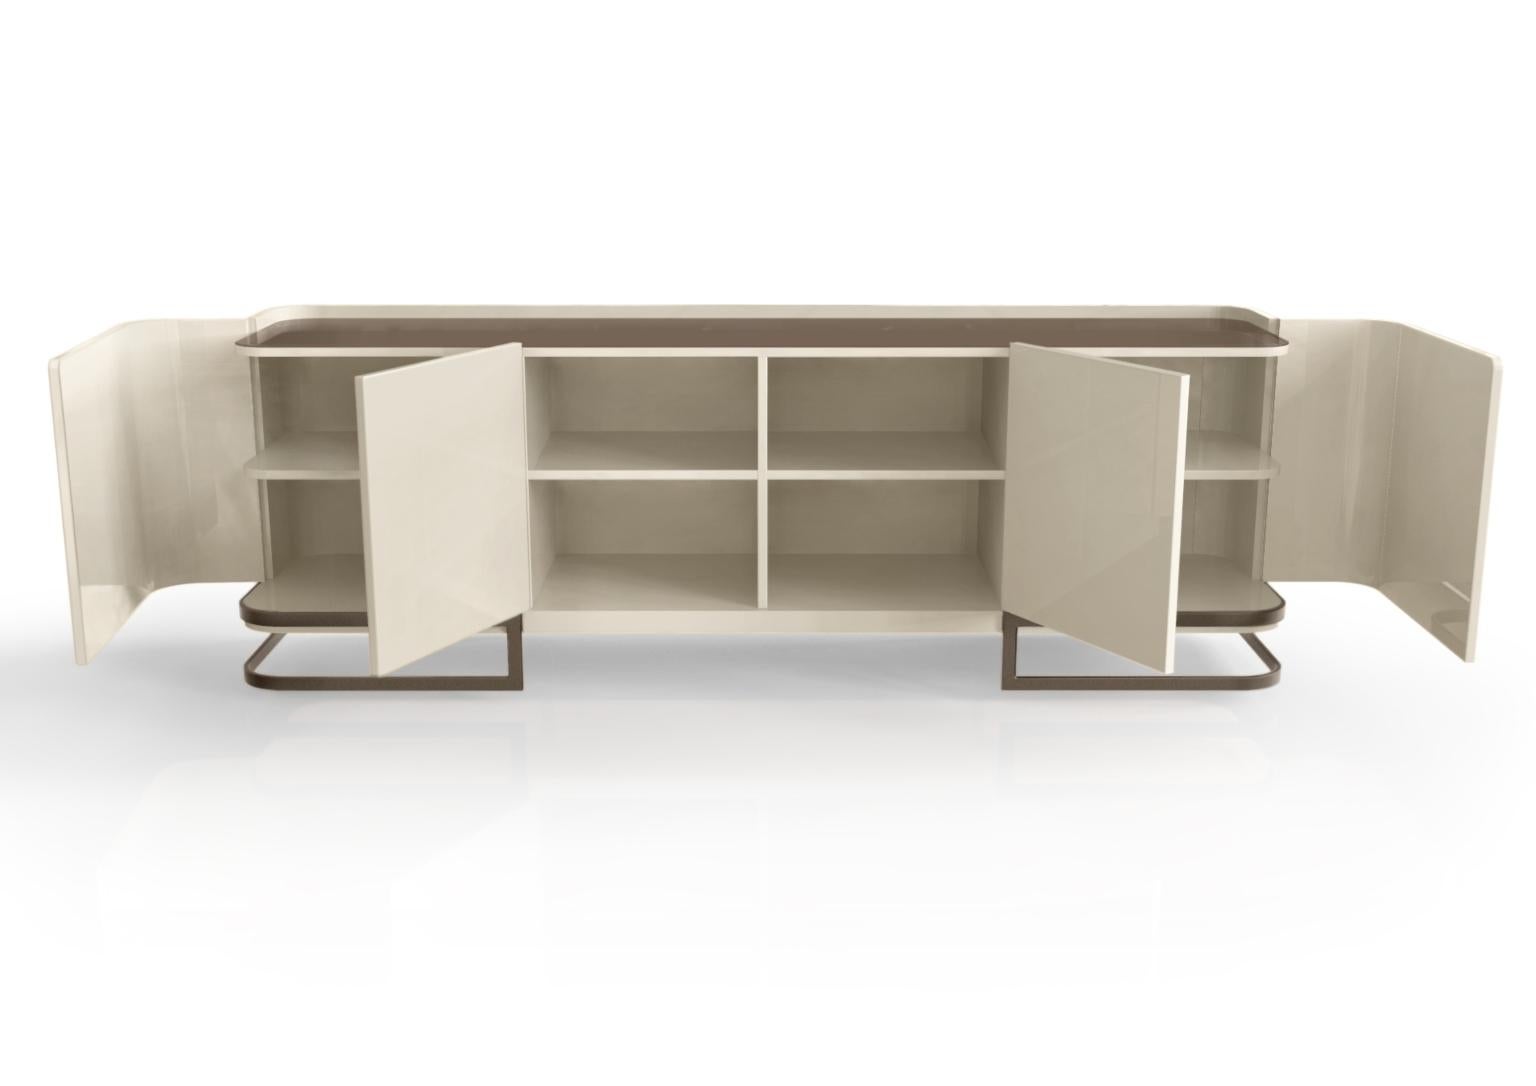 Modern Latte Lacquered High Gloss Cream Sideboard by Caffe Latte

A Modern Latte Lacquered High Gloss Cream Sideboard by Caffe Latte, with strong lines and a firm personality, versatile, functional, and smooth, latte is lacquered in high gloss cream